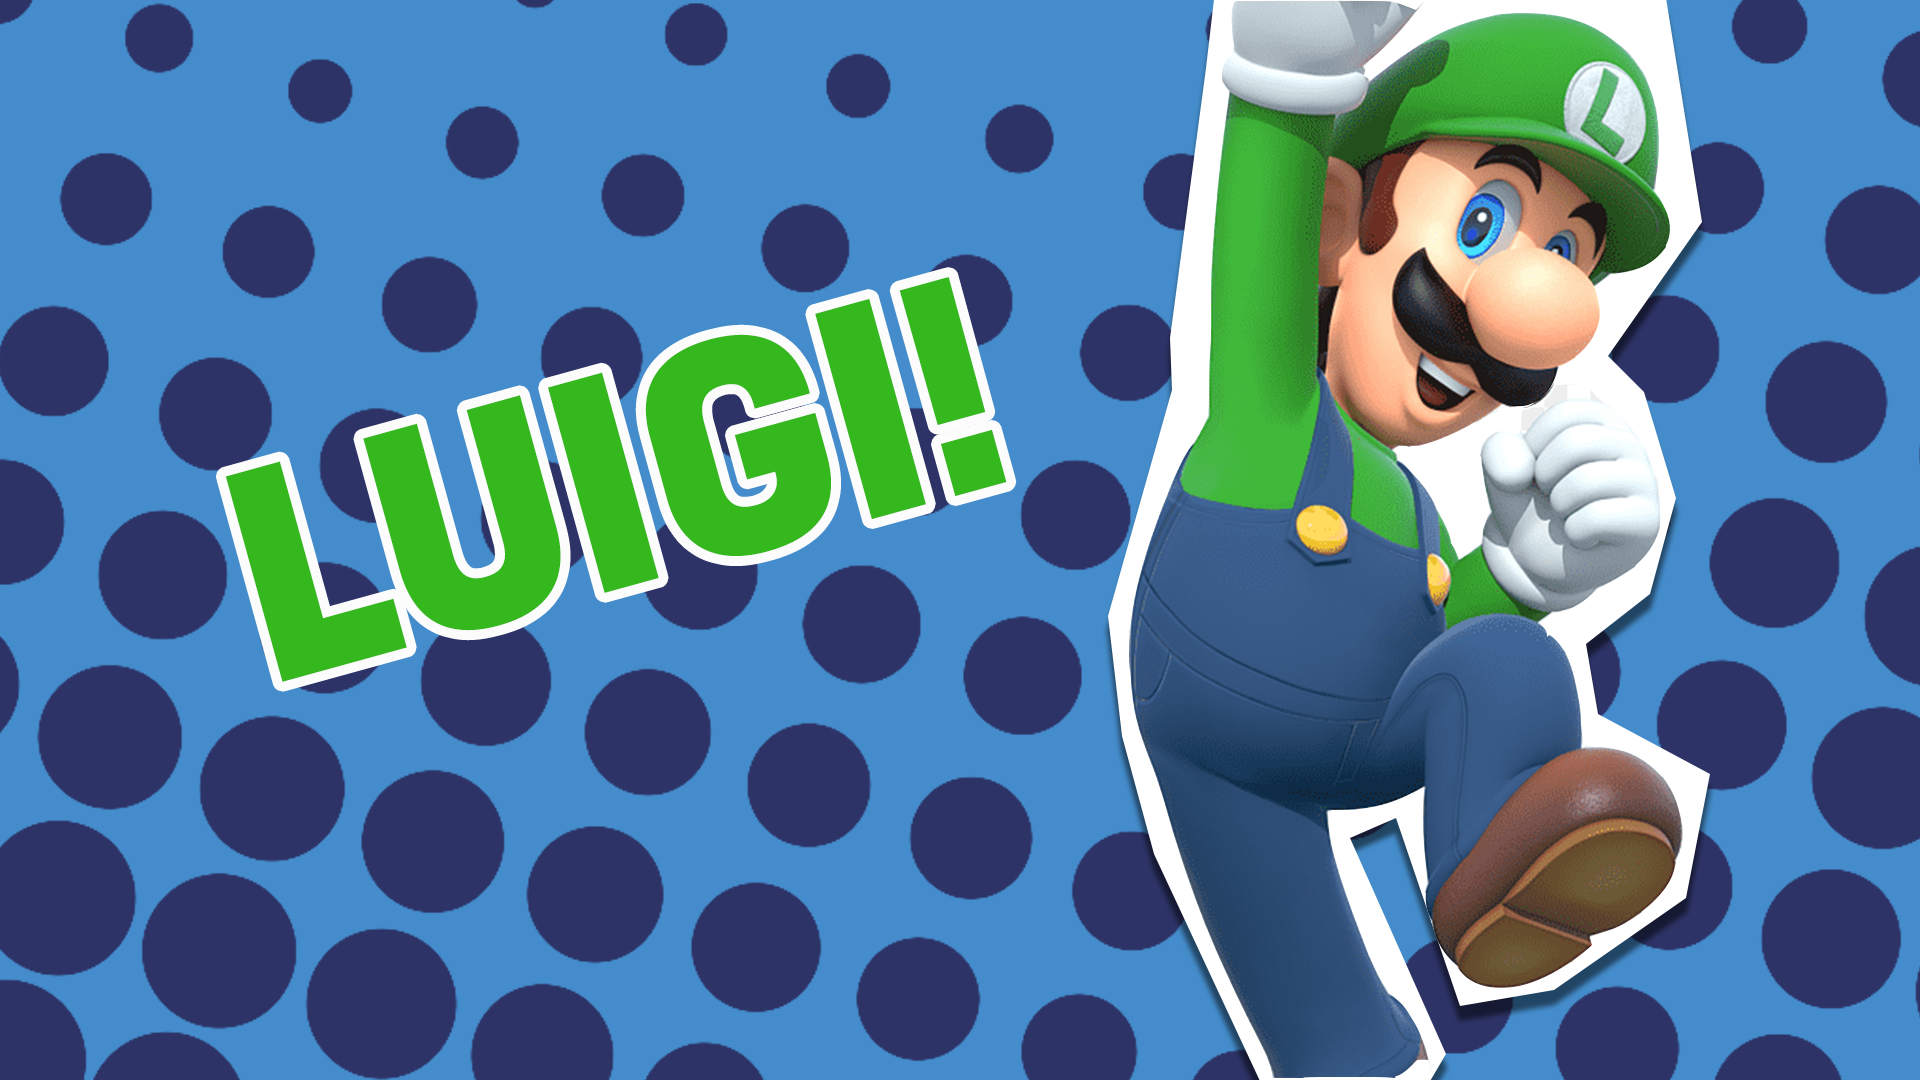 You're more Luigi! You love nothing better than hanging with your friends and family and having fun! People can always rely on you!